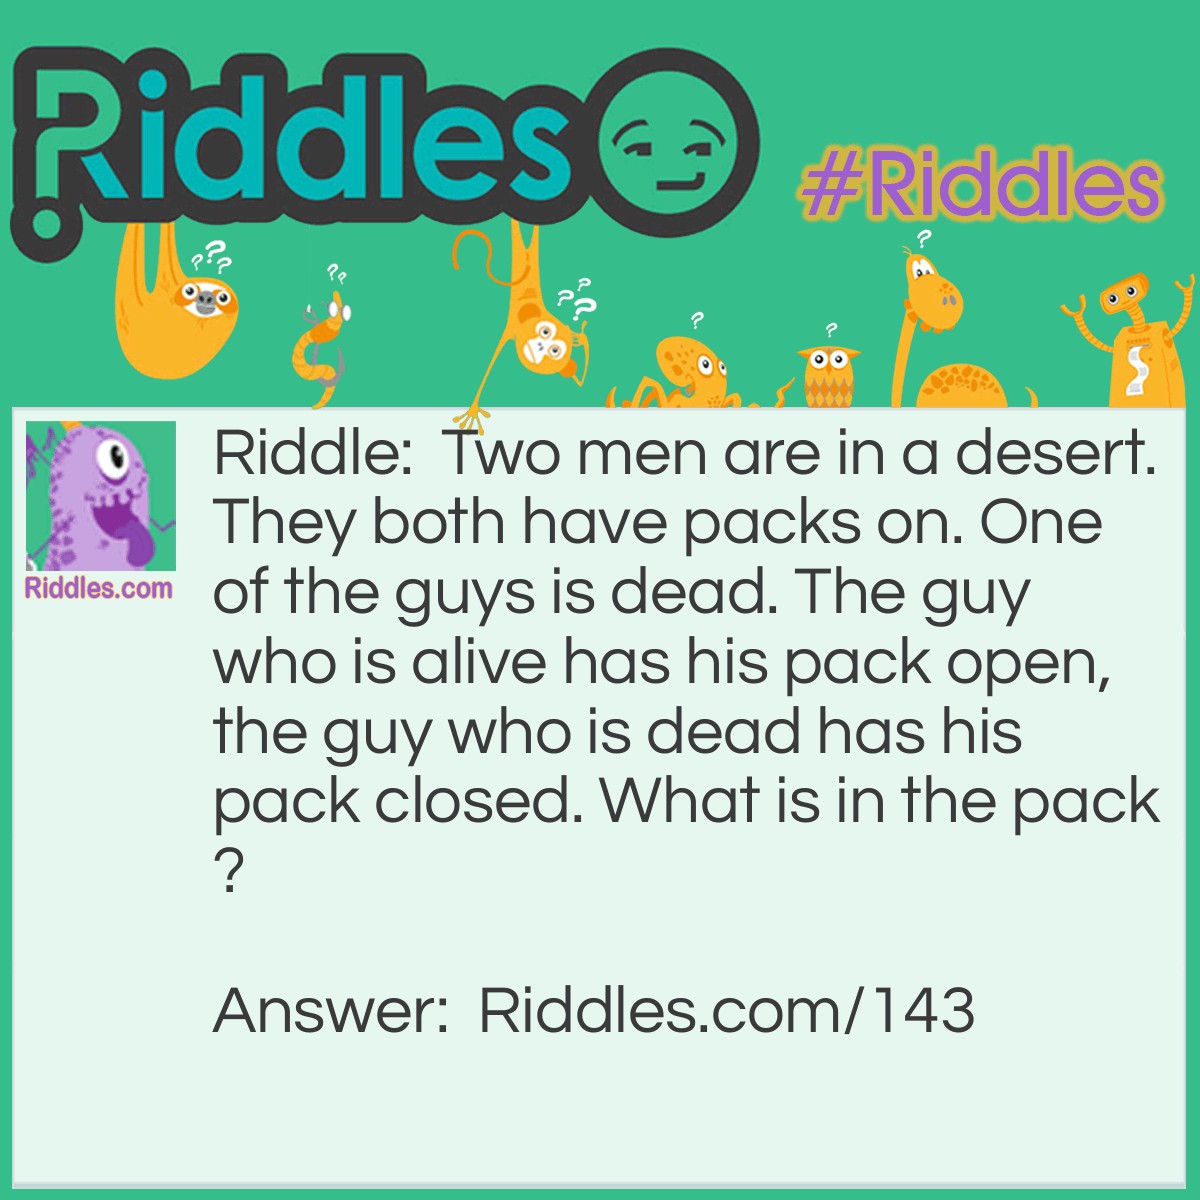 Riddle: Two men are in a desert. They both have packs on. One of the guys is dead. The guy who is alive has his pack open, the guy who is dead has his pack closed. What is in the pack? Answer: A parachute (that didn't open)